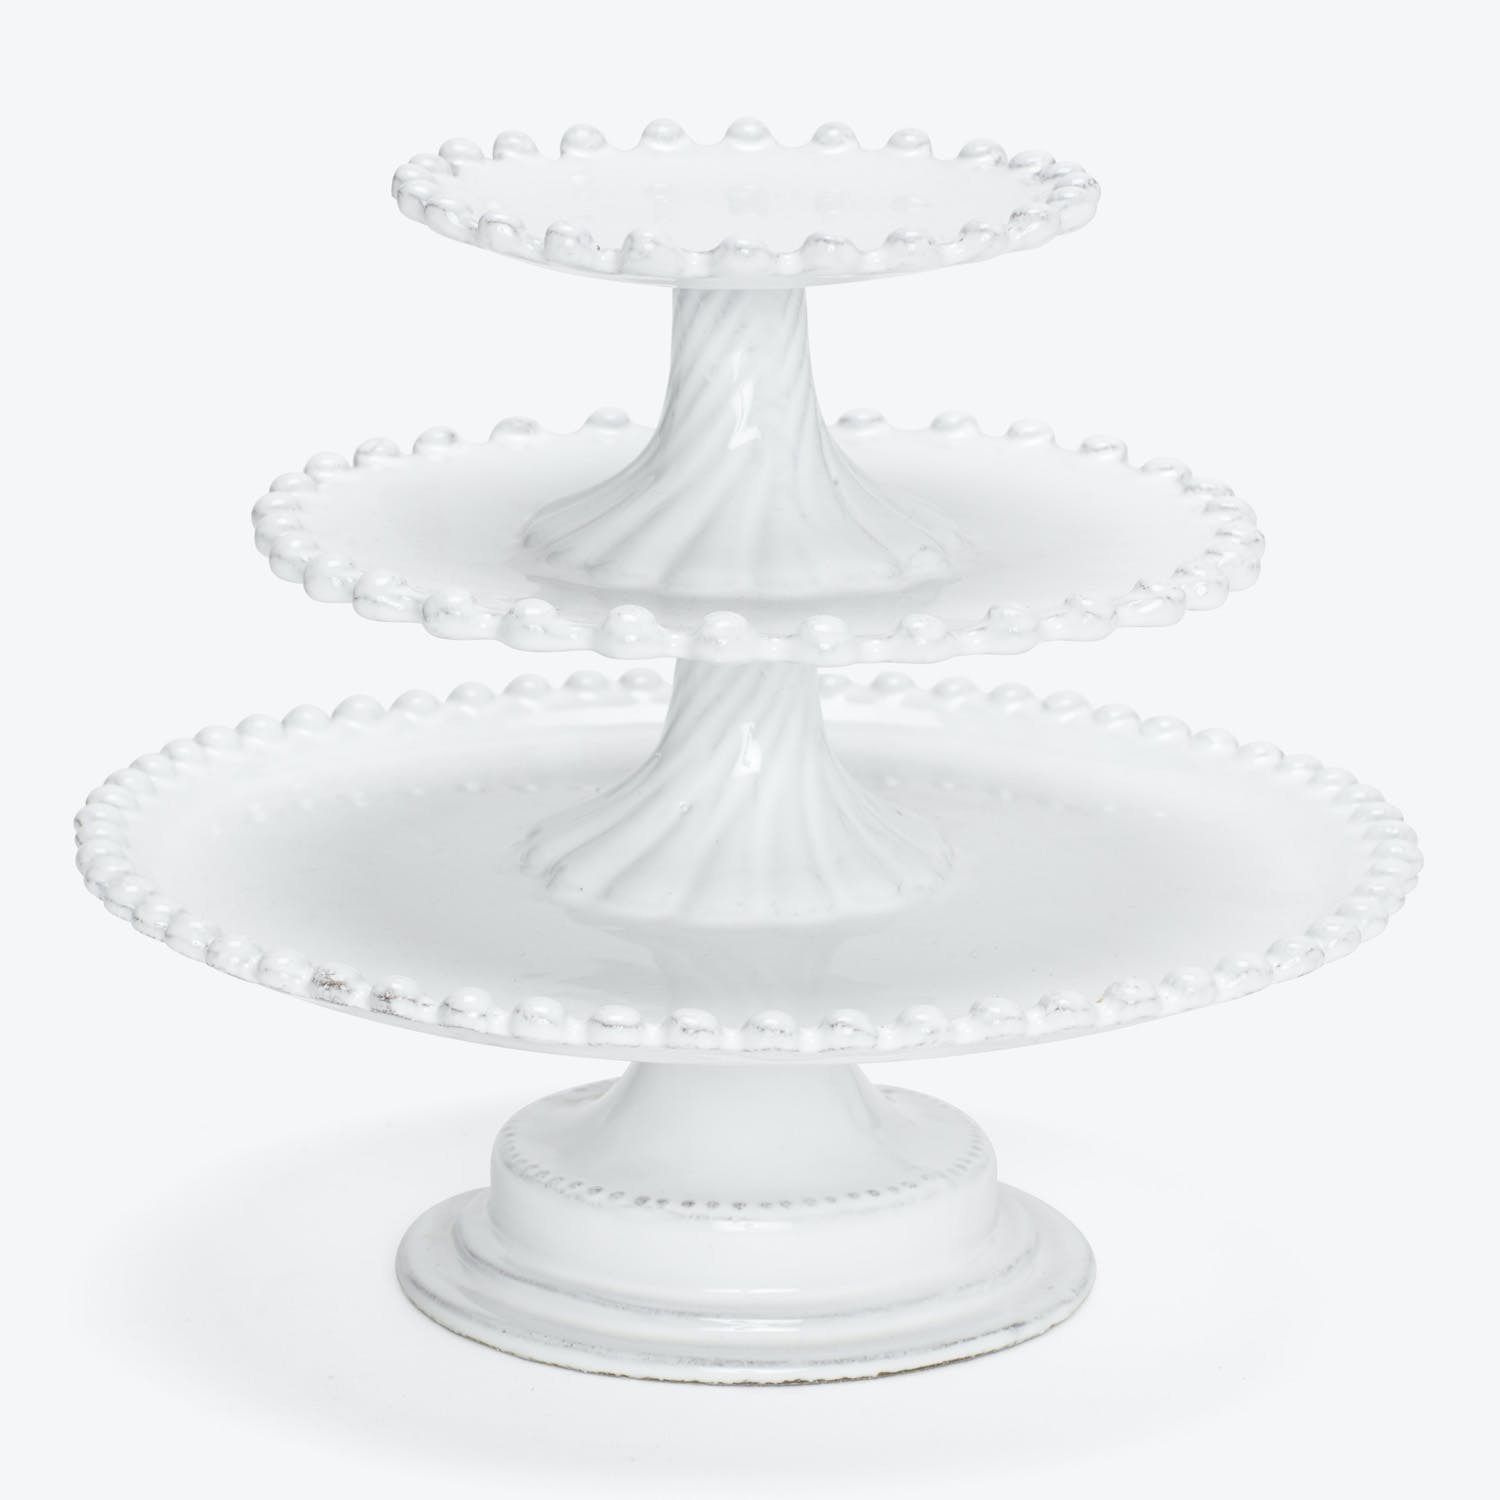 Elegant three-tiered white cake stand with decorative dotted edges.